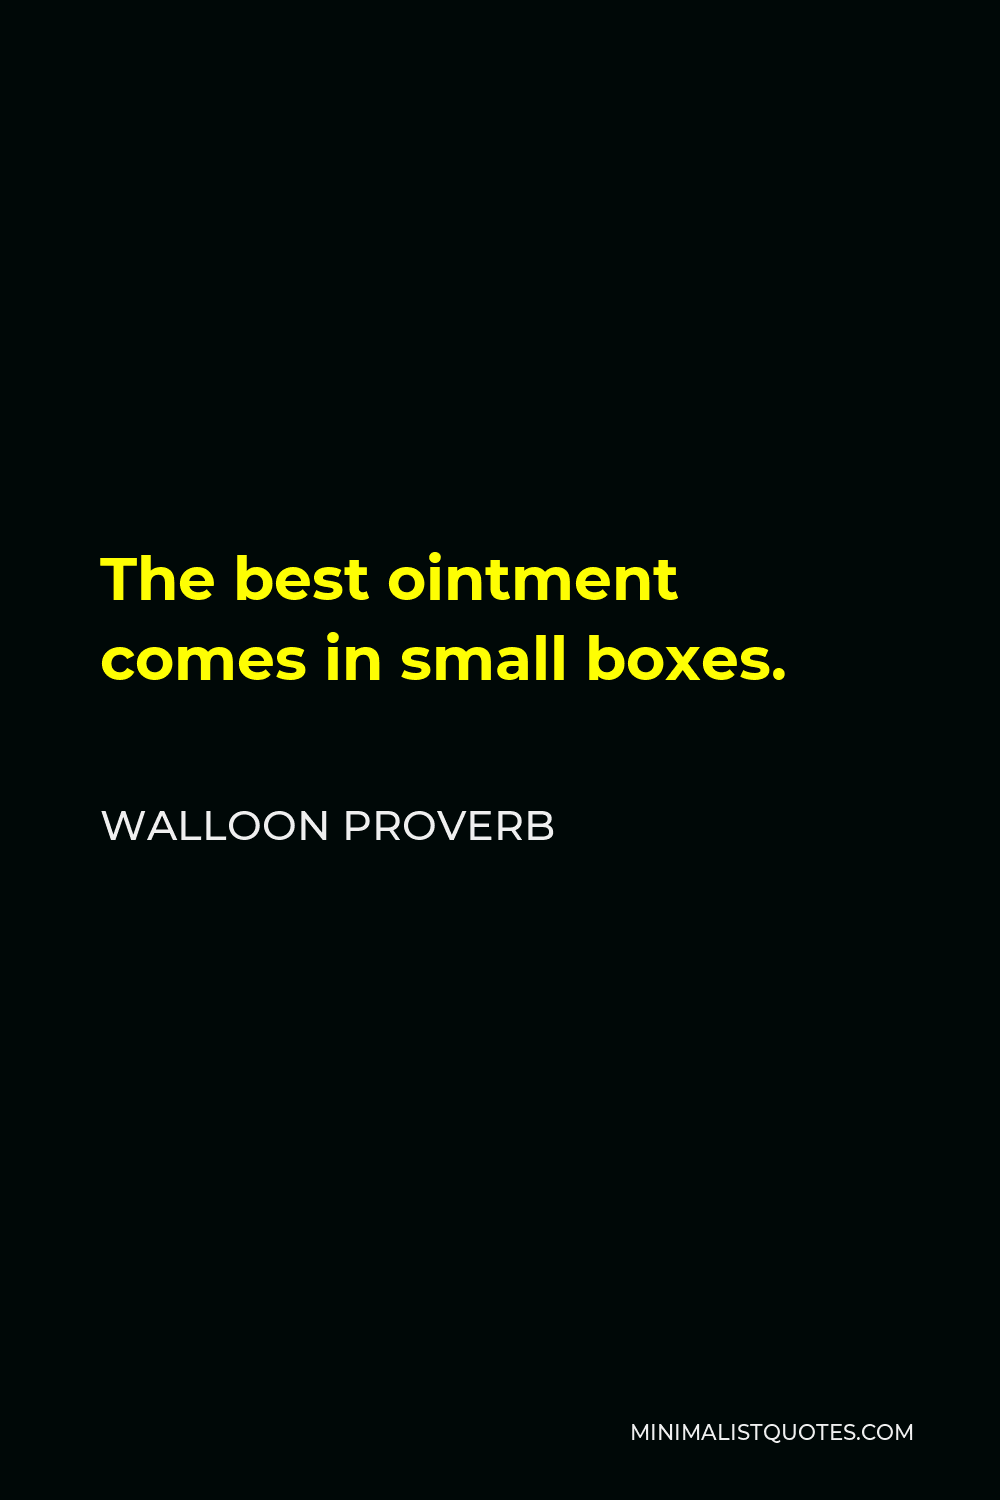 Walloon Proverb Quote - The best ointment comes in small boxes.